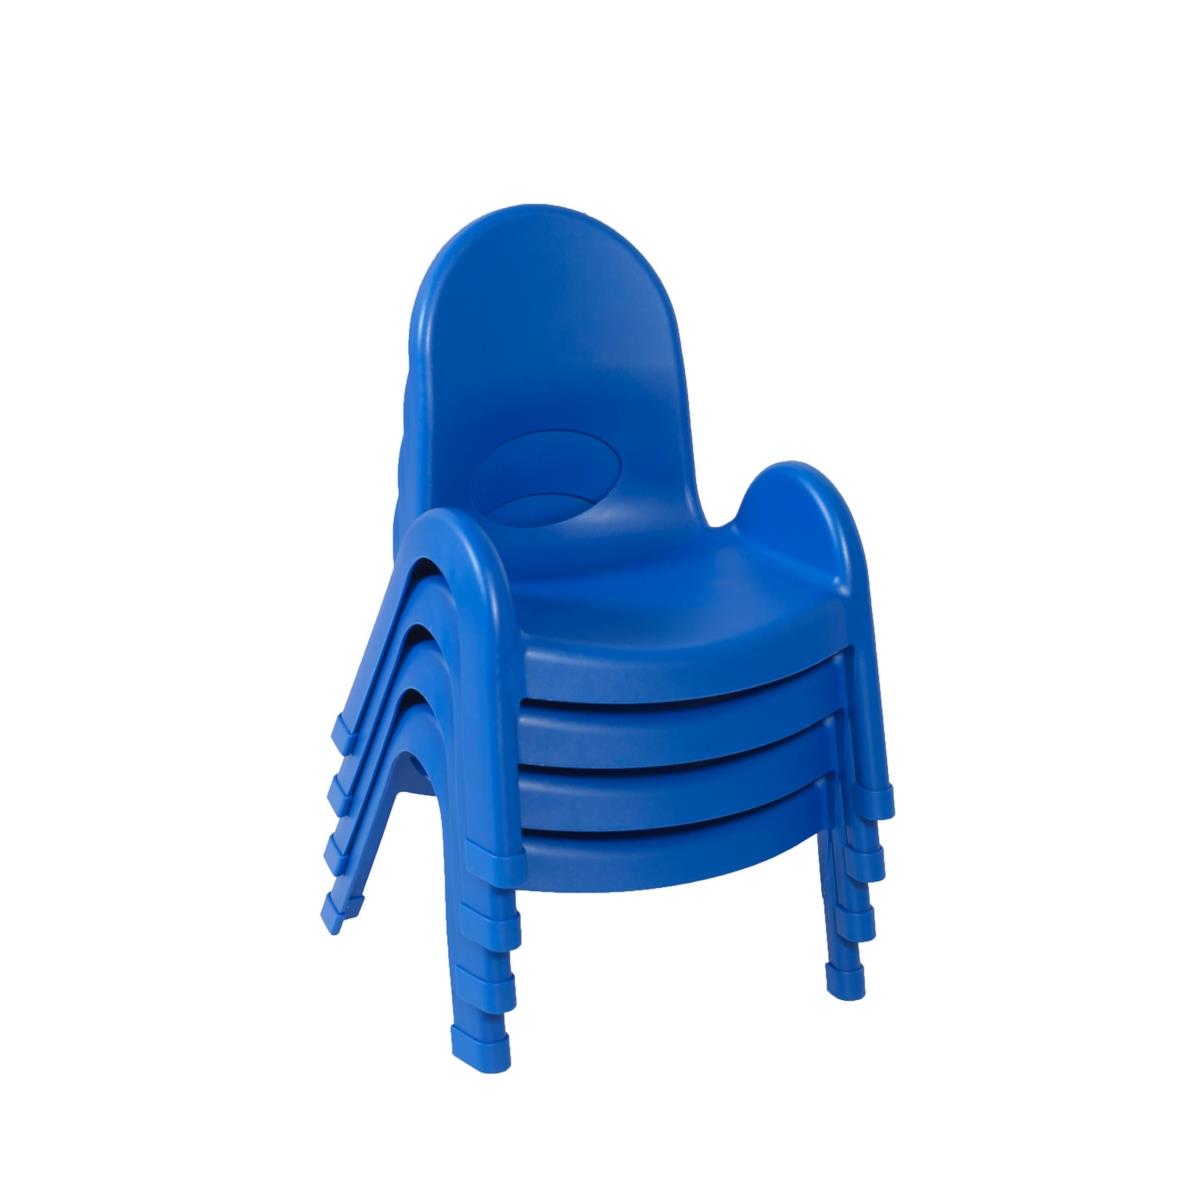 Ab7707pb4 7 In. Value Stack Child Chair, Royal Blue - Pack Of 4